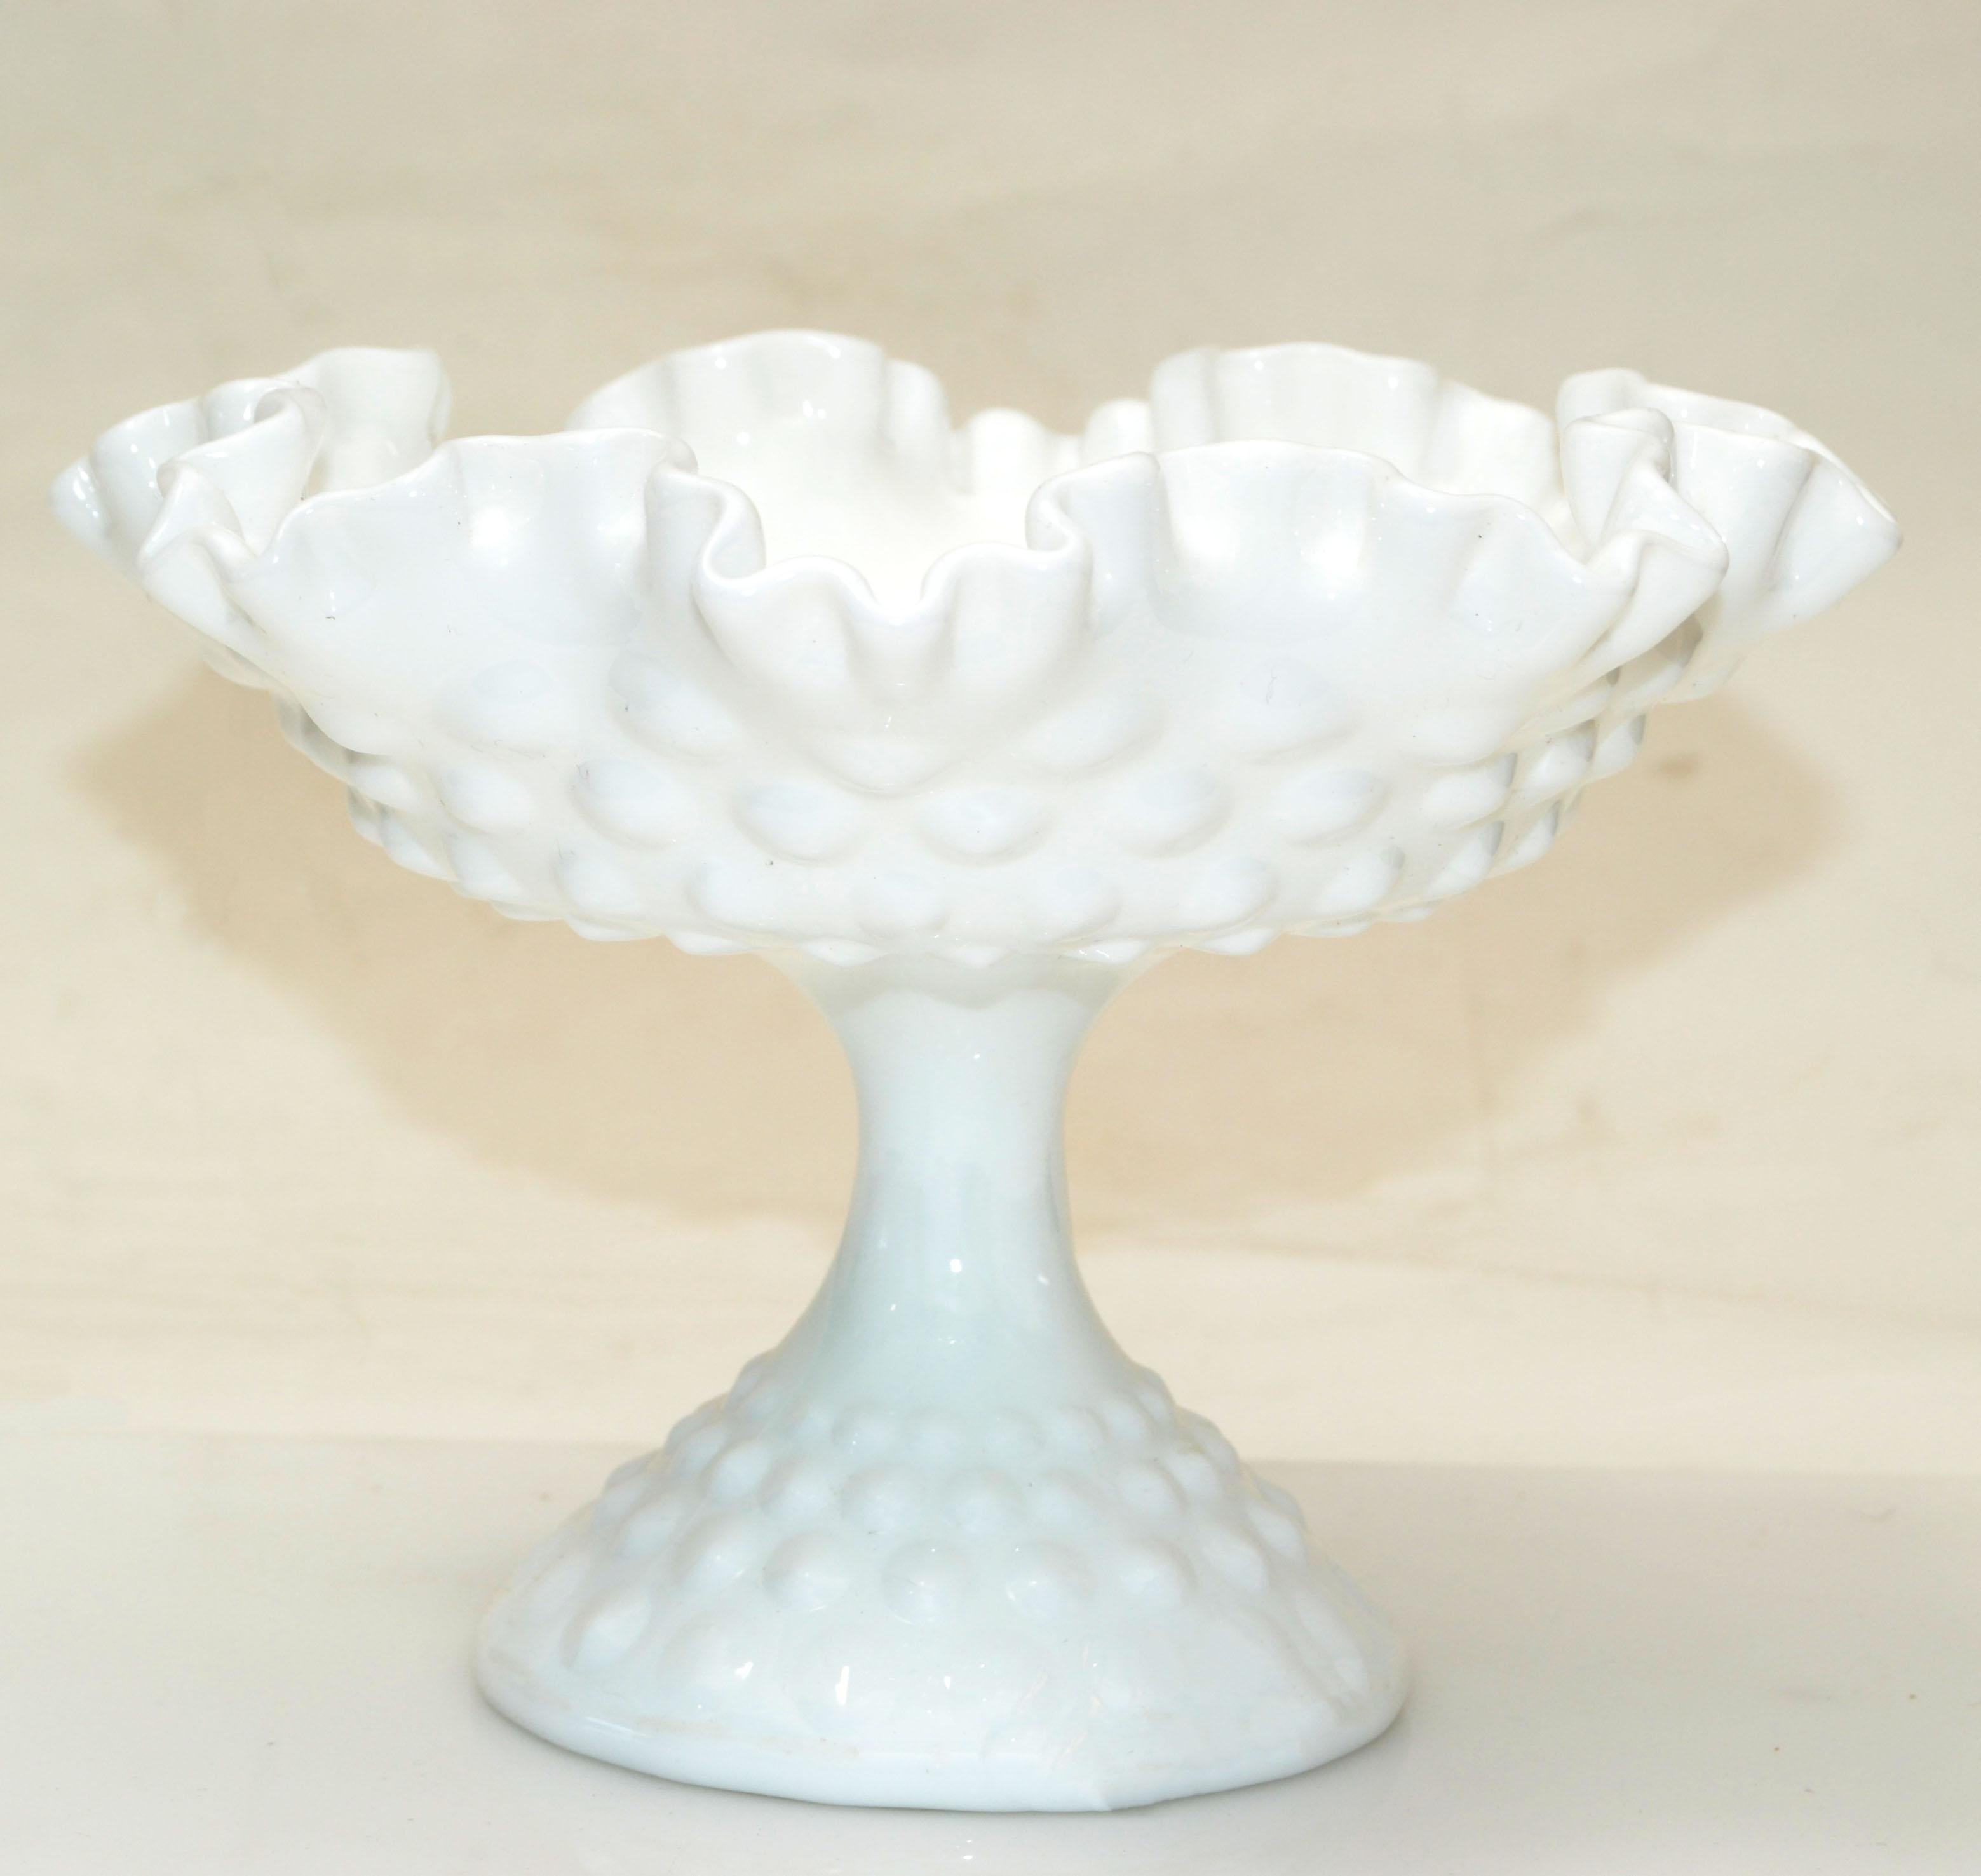 Fenton Art Glass style hobnail white ruffled milk glass footed bowl, candy dish or whip cream serving bowl from the 1970. 
Great craftsmanship with elegance.
Simply beautiful.